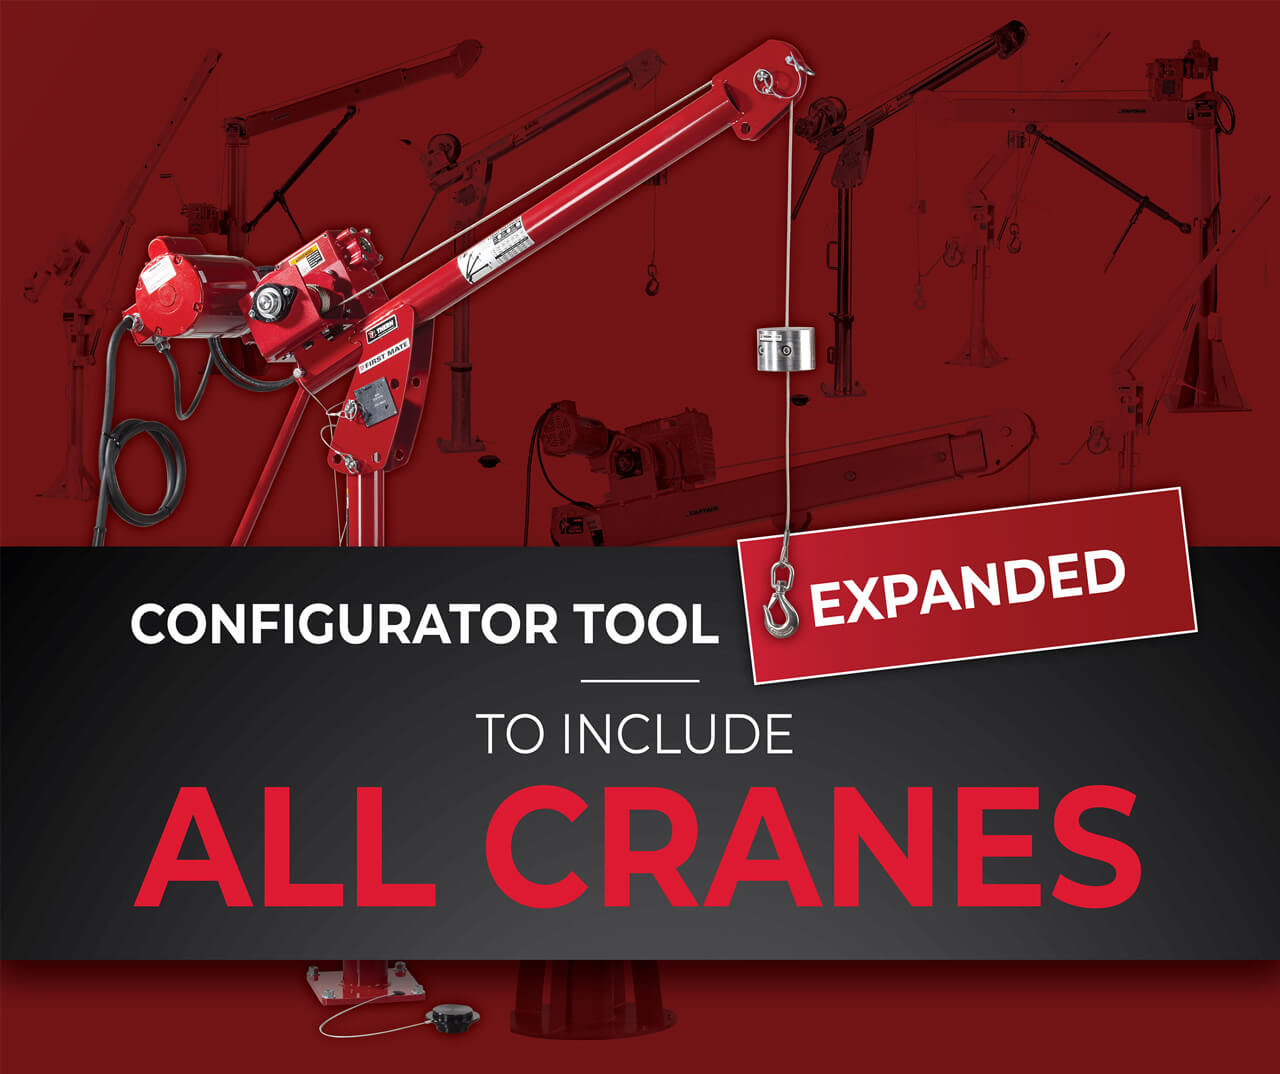 configurator tool expanded to include all cranes